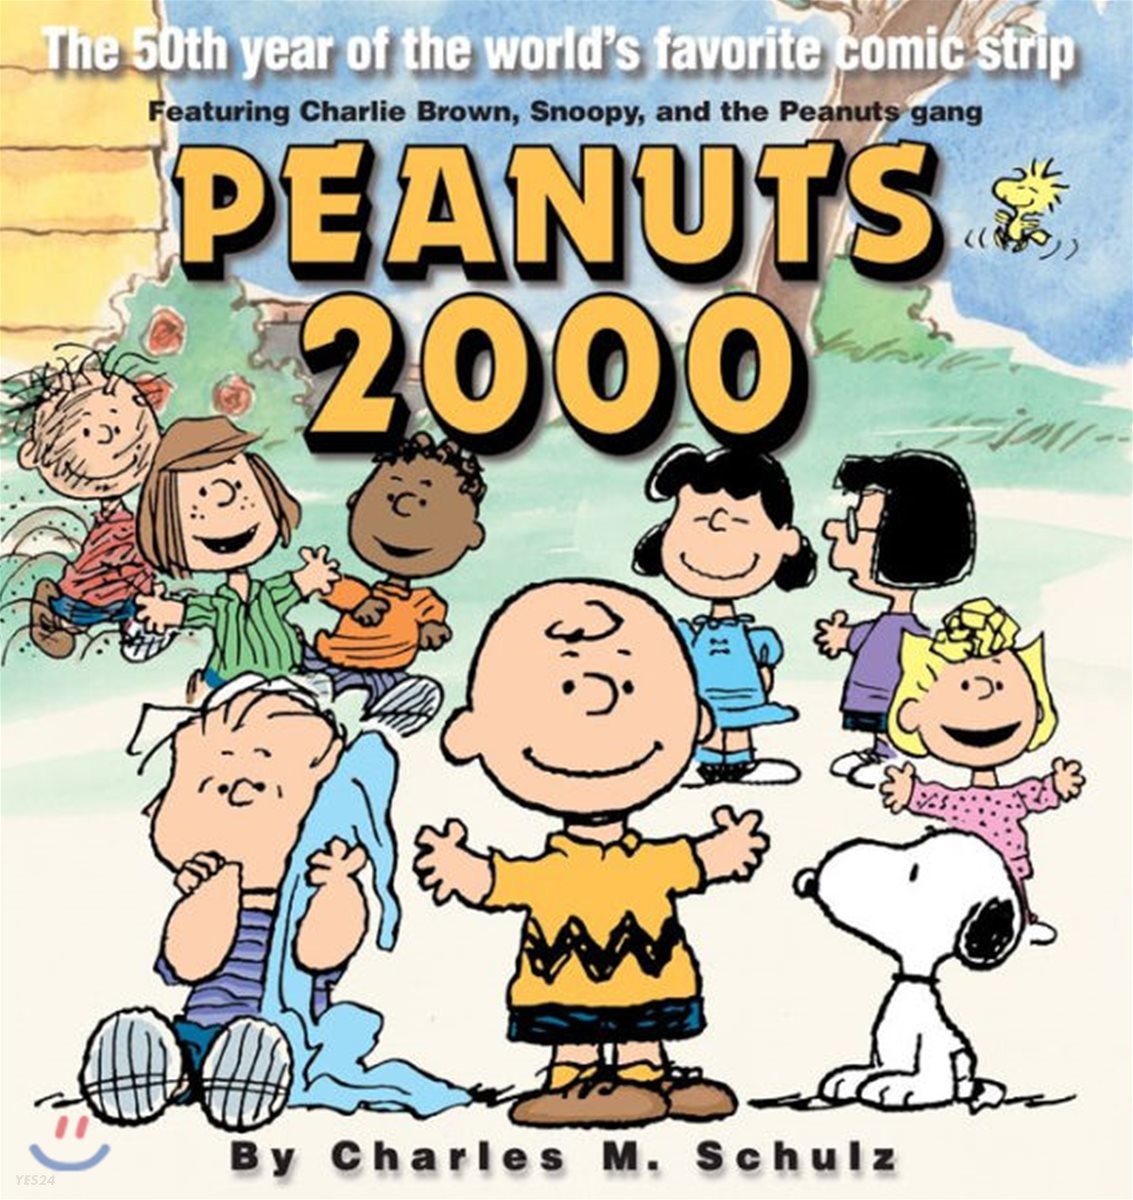 Peanuts (The 50th Year Of The World’s Favorite Comic Strip)